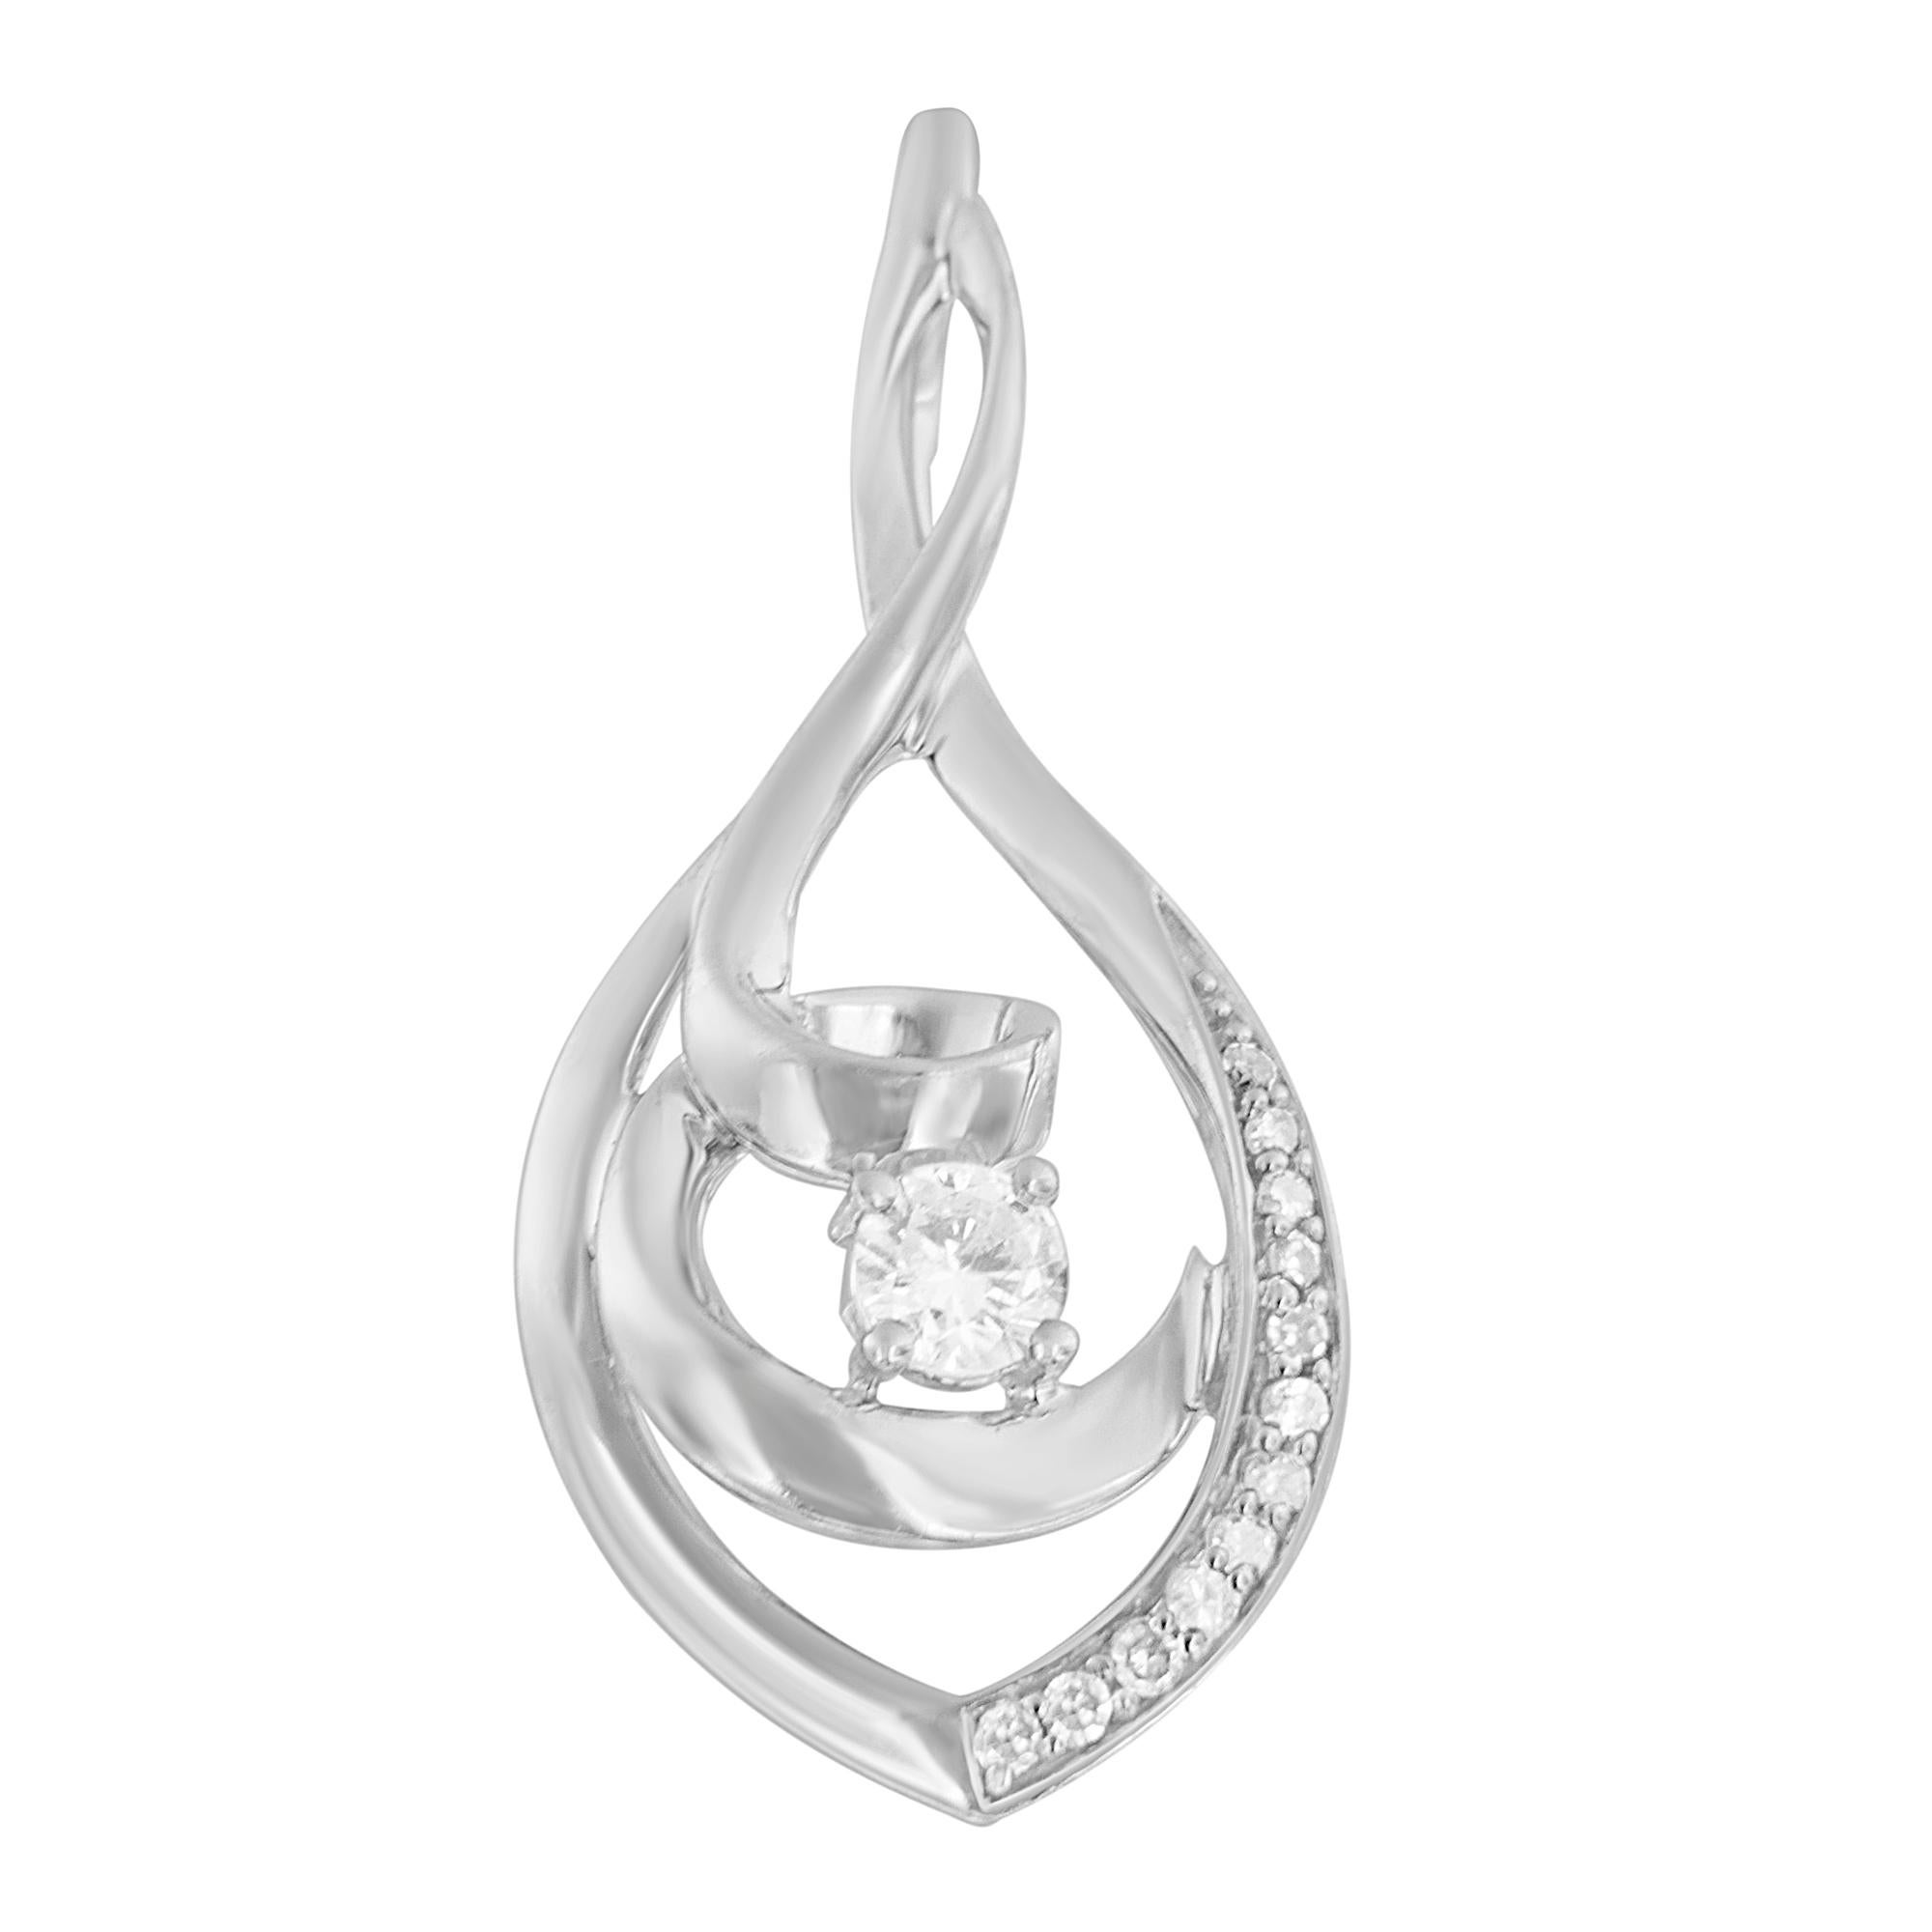 Flaunt your gorgeous looks by wearing this elegant diamond fashion pendant. Sophisticated in design, the pendant is made using glistening ten karats white gold and is buffed high to luster. This beautiful pendant is decorated with sparkling round